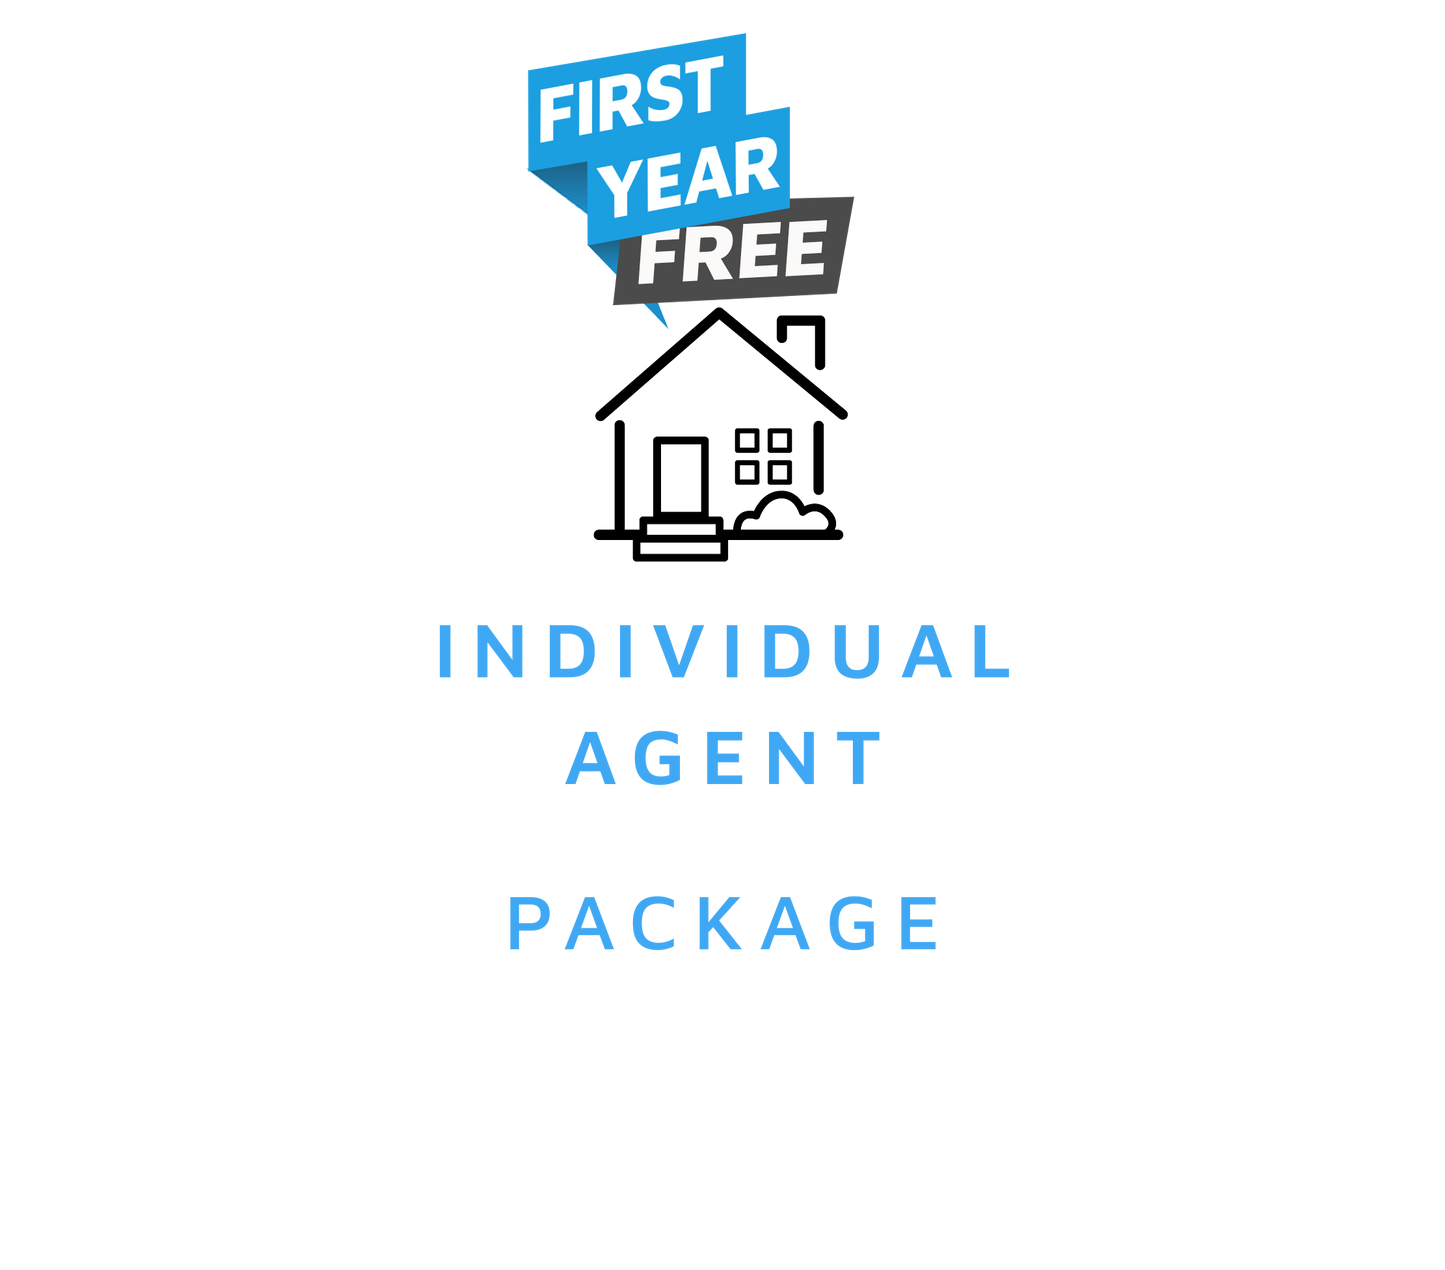 FREE FIRST YEAR - Individual Agent Package - use code ATA23